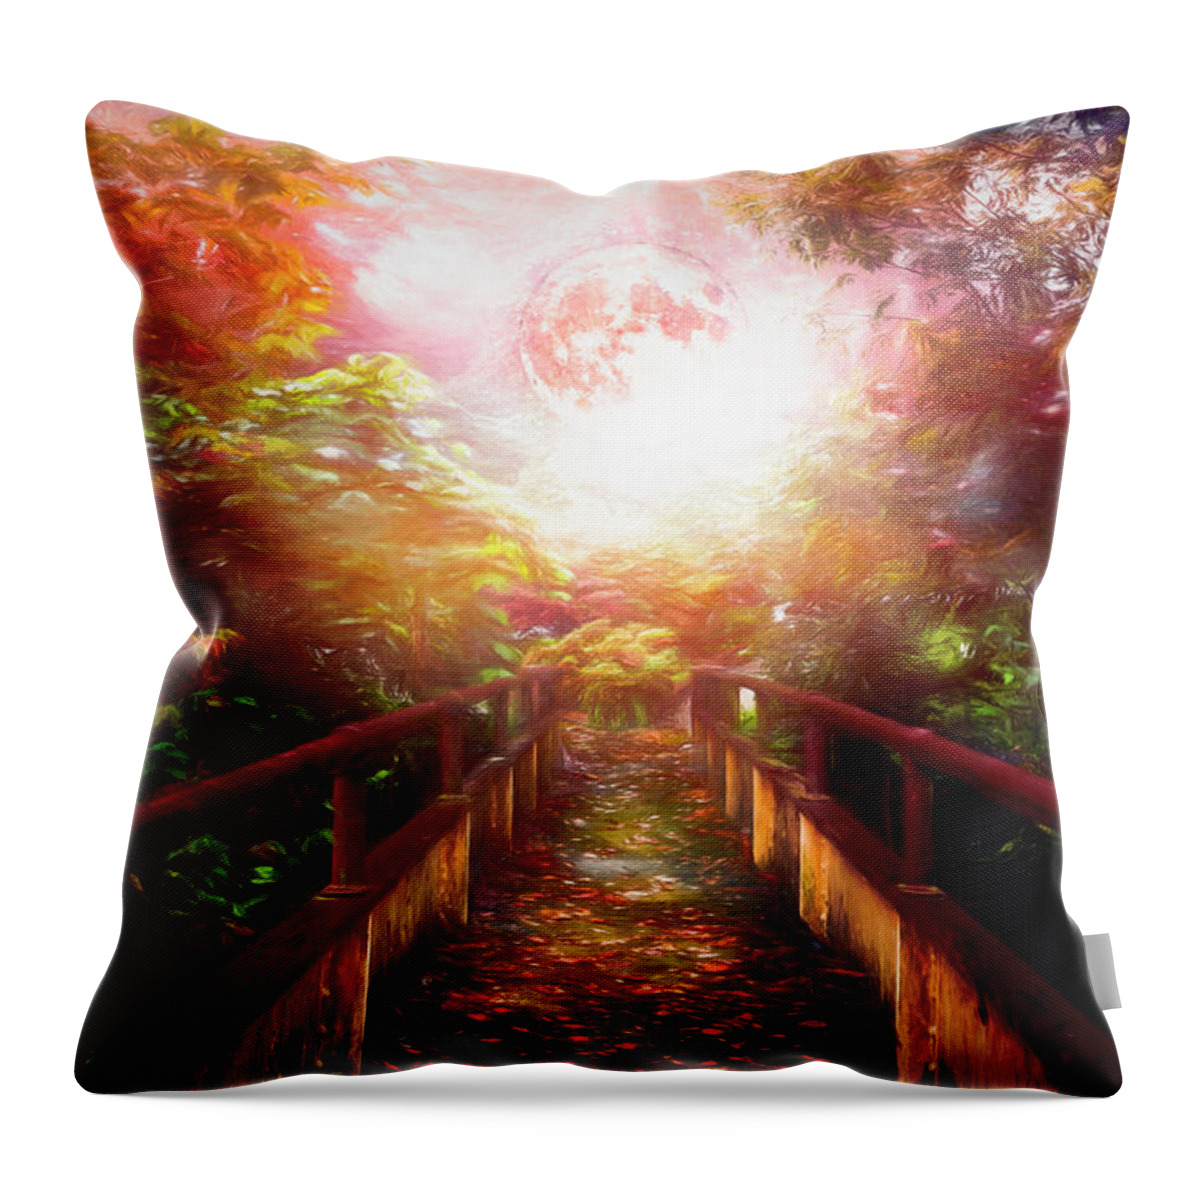 Appalachia Throw Pillow featuring the photograph Scattered Leaves Painting by Debra and Dave Vanderlaan